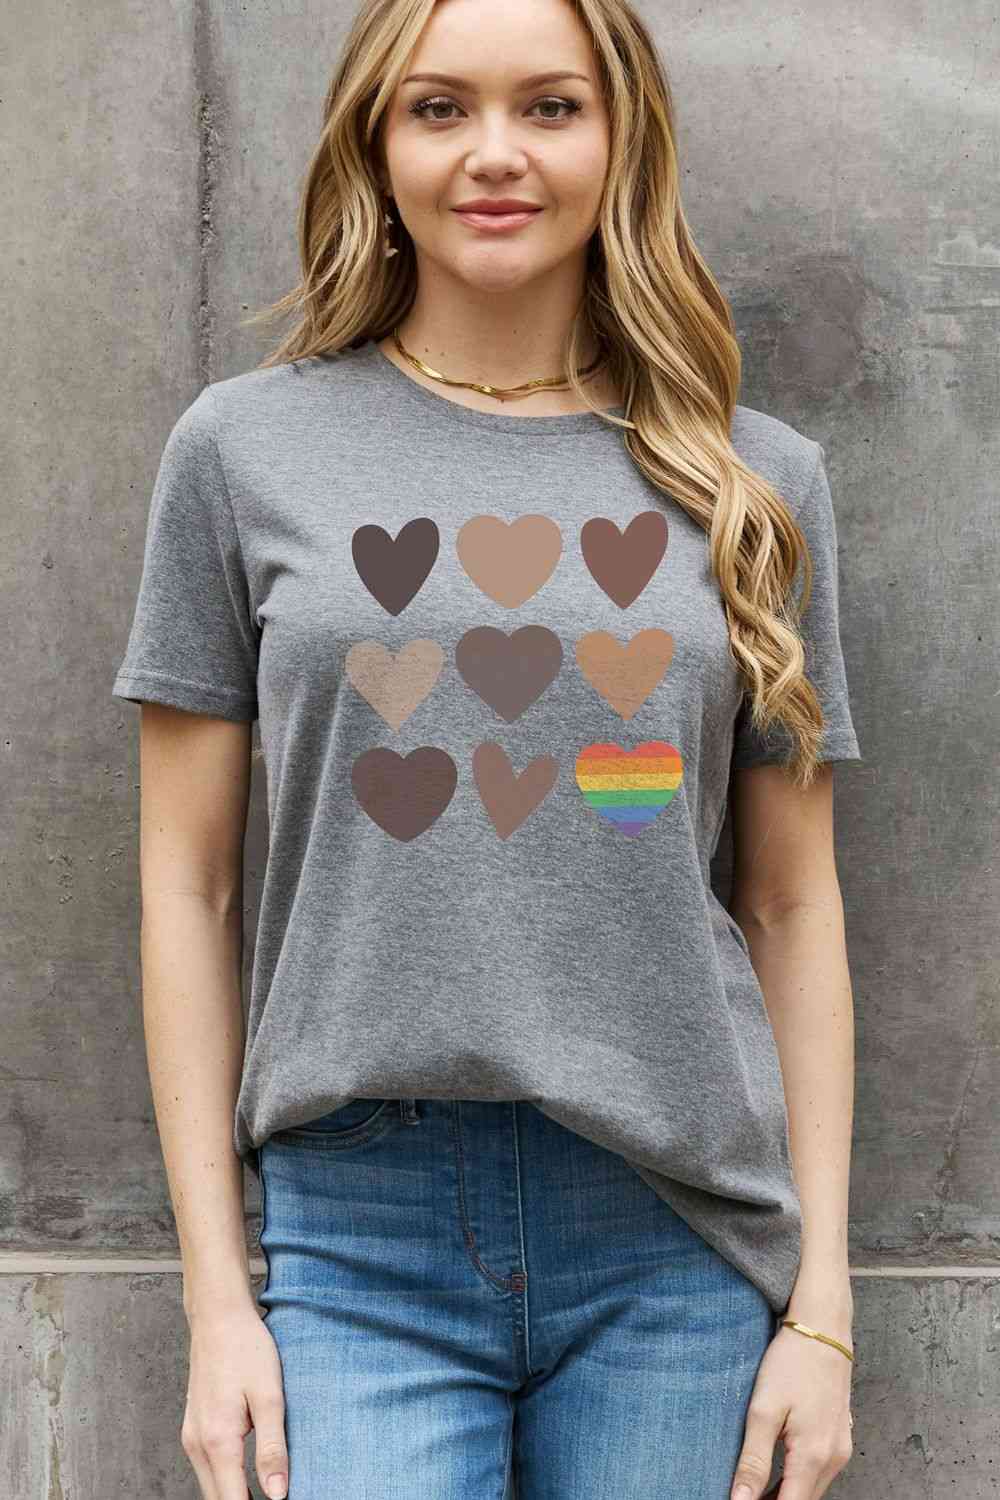 Simply Love Simply Love Full Size Heart Graphic Cotton Tee